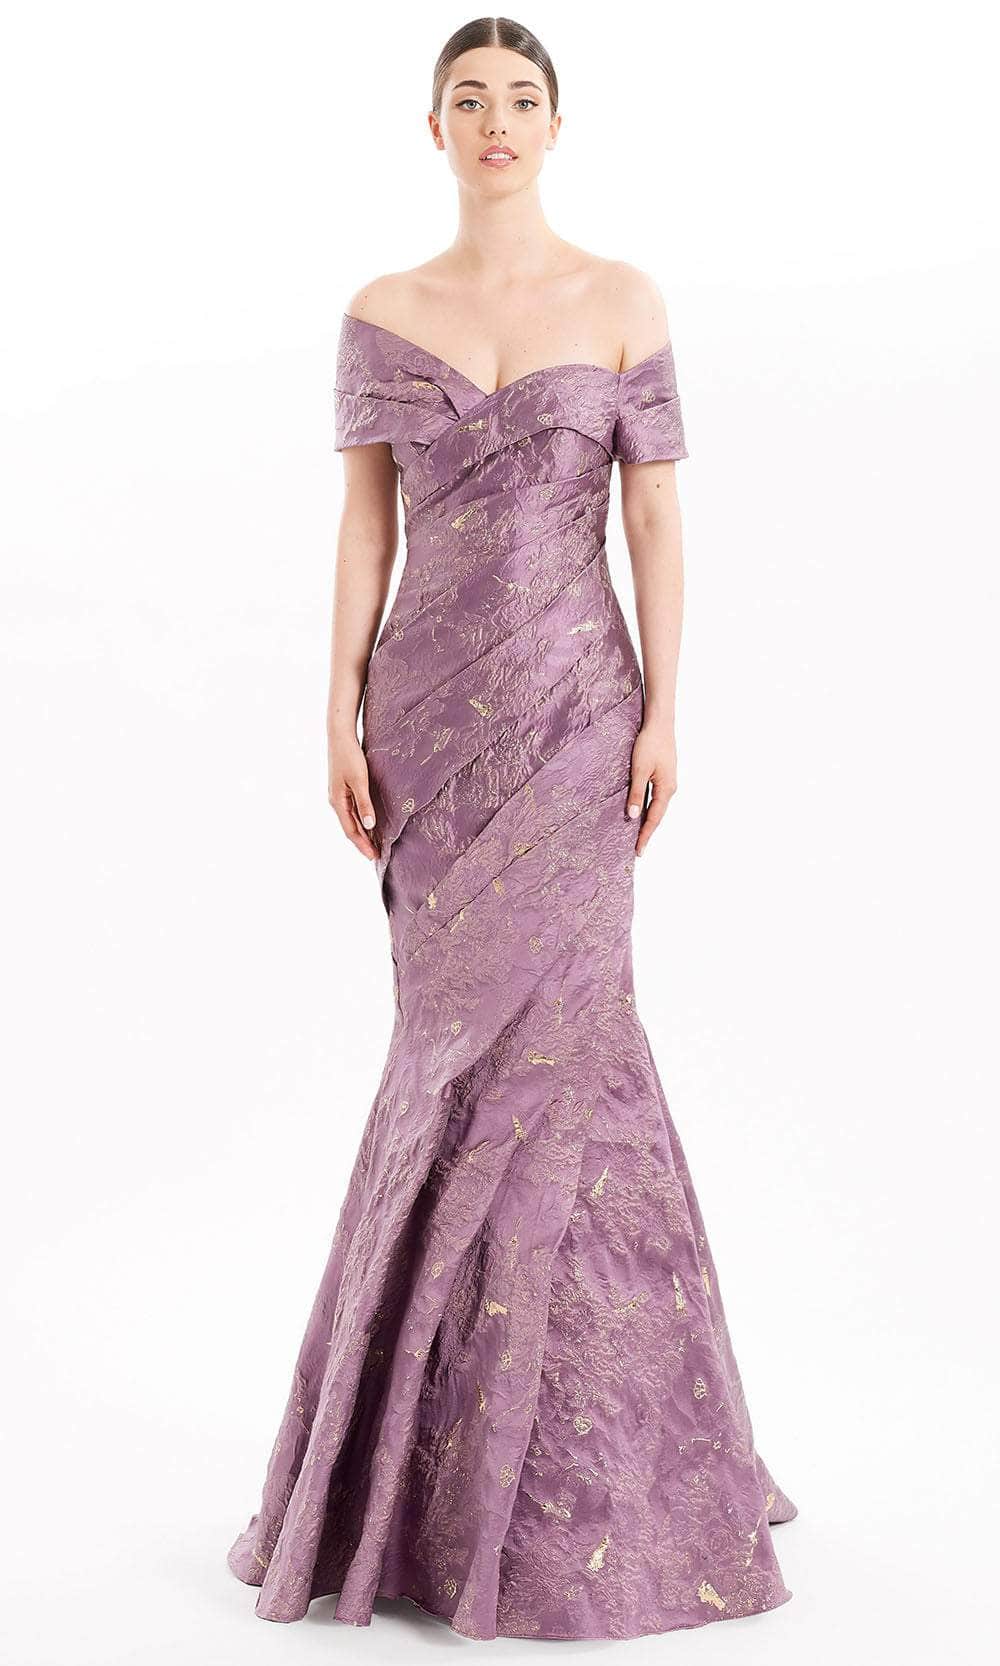 Alexander By Daymor 1666F22 - Faux Wrap Mermaid Gown Special Occasion Dress 4 / Mauve/Gold